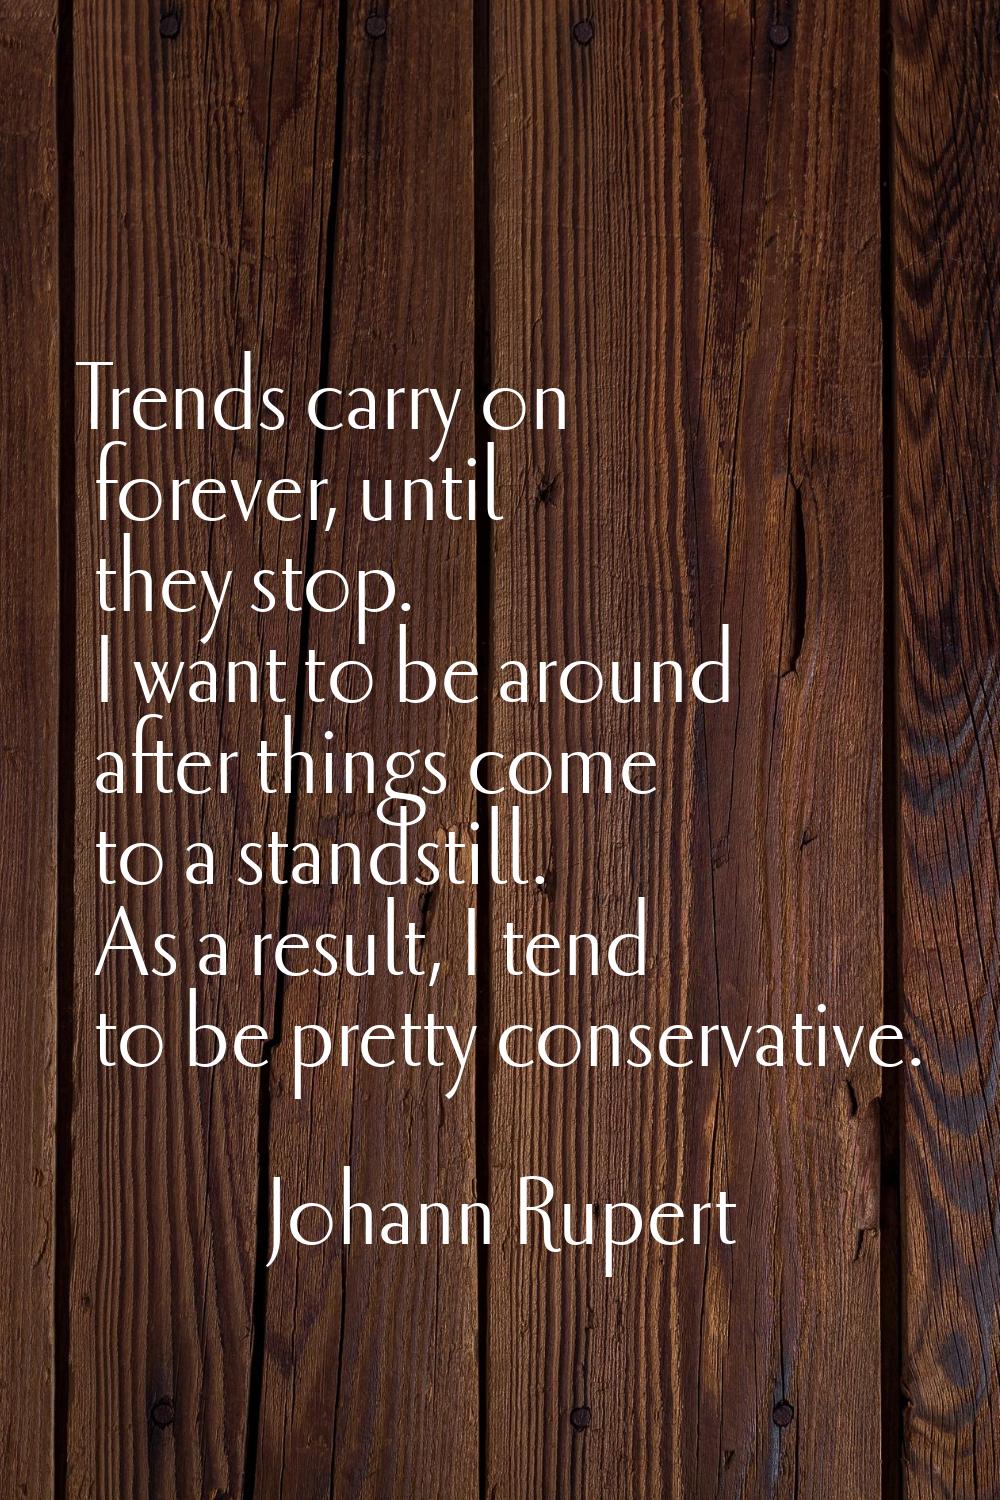 Trends carry on forever, until they stop. I want to be around after things come to a standstill. As